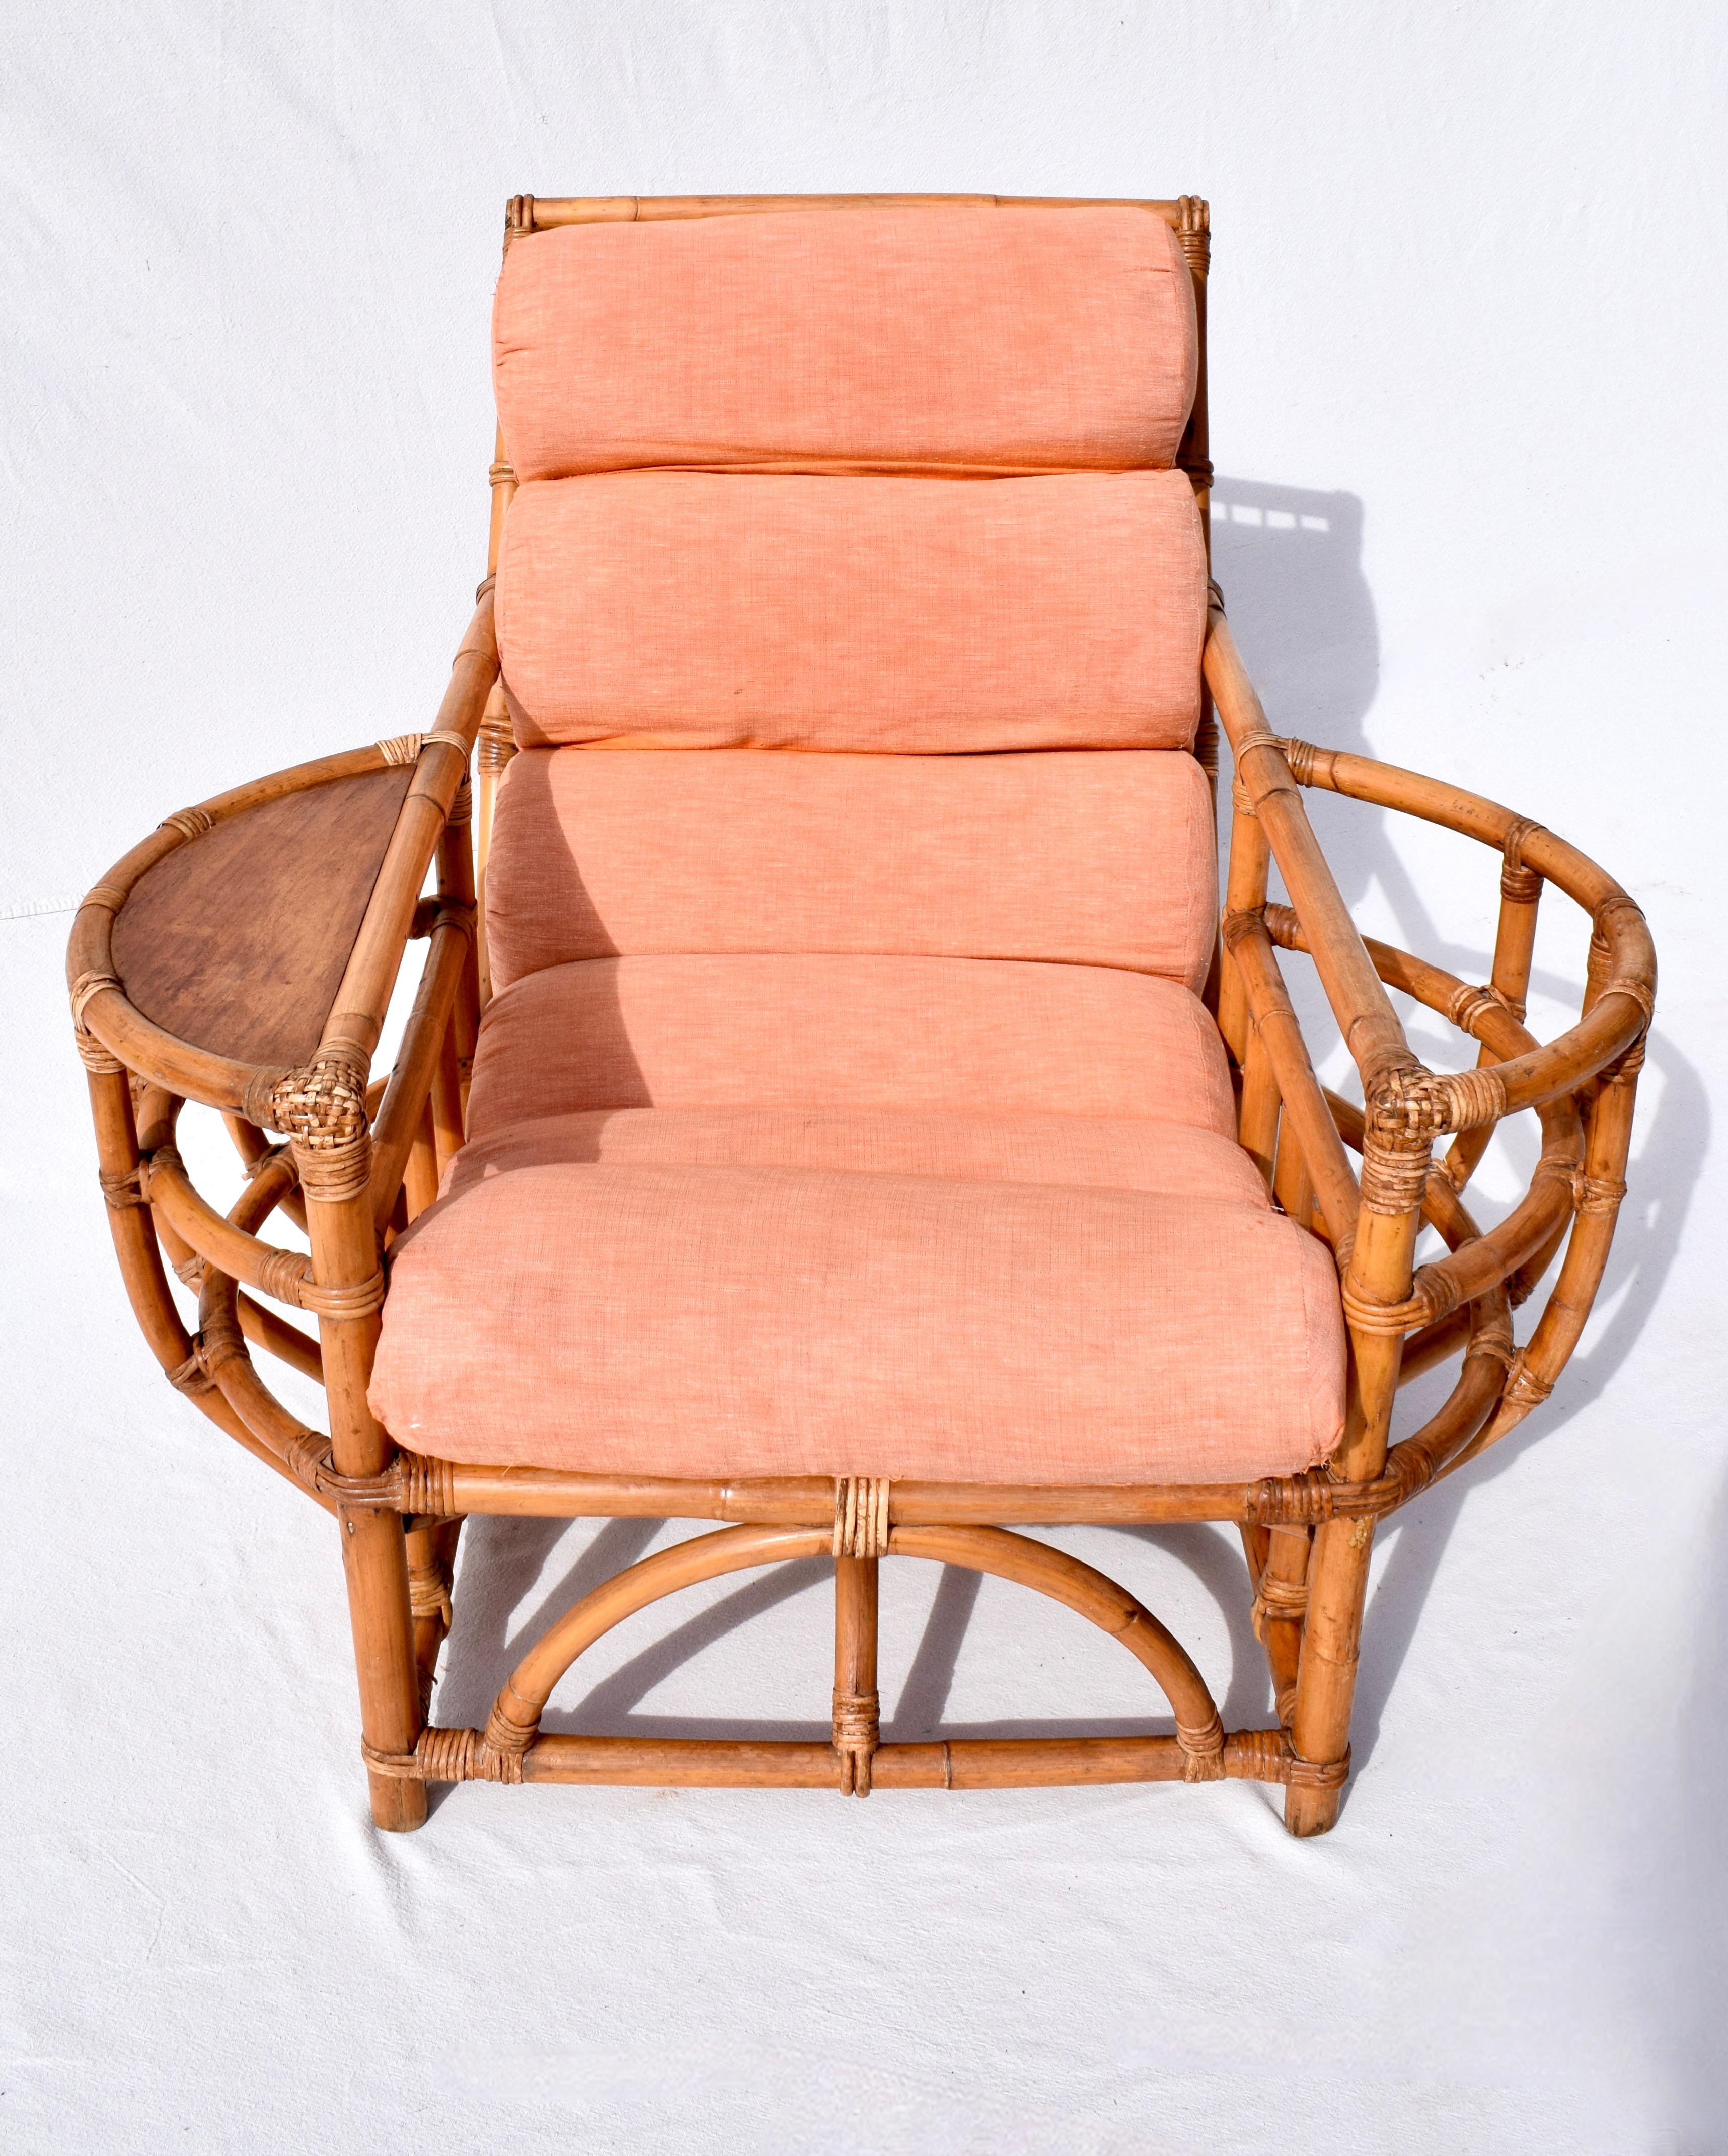 American 1950s Ficks Reed bent bamboo lounge chair with unusually well maintained and preserved original channeled canvas upholstered cushion, magazine pocket & beverage surface.  A scarcely seen style in form and condition. Seat: 16